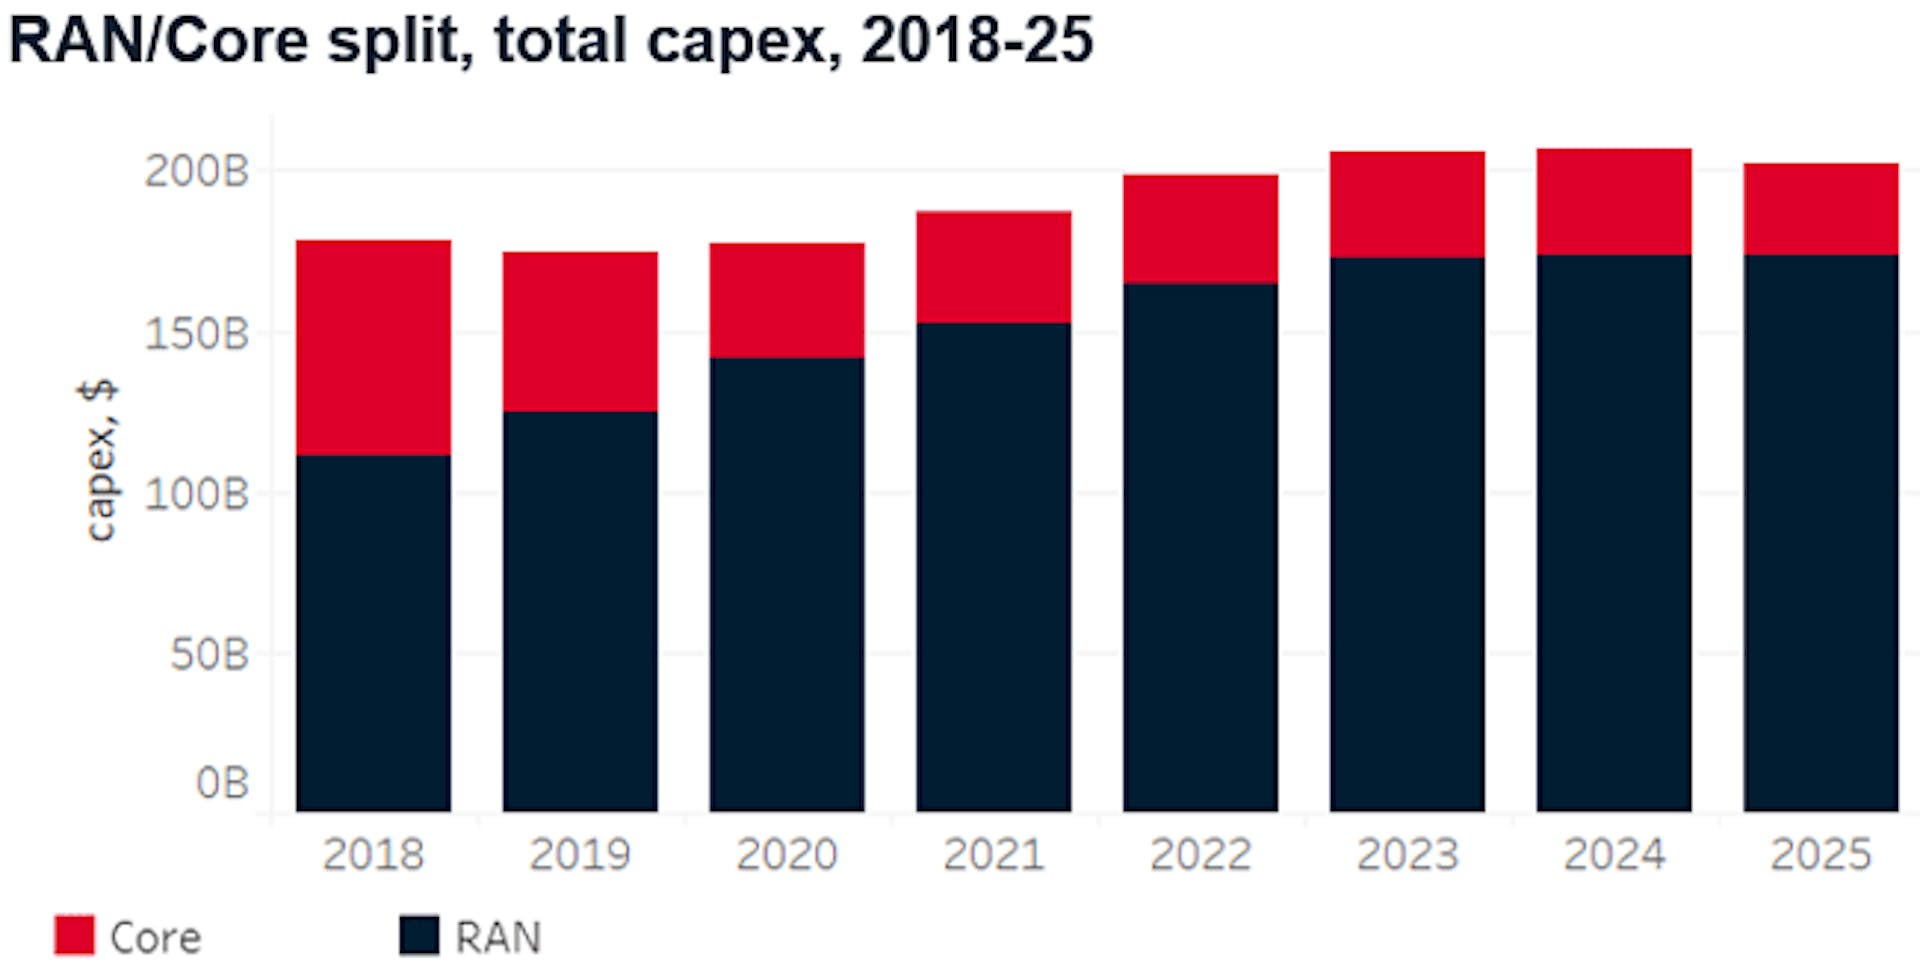 Figure 1. Capex investment for 5G. Source: GSMA Intelligence